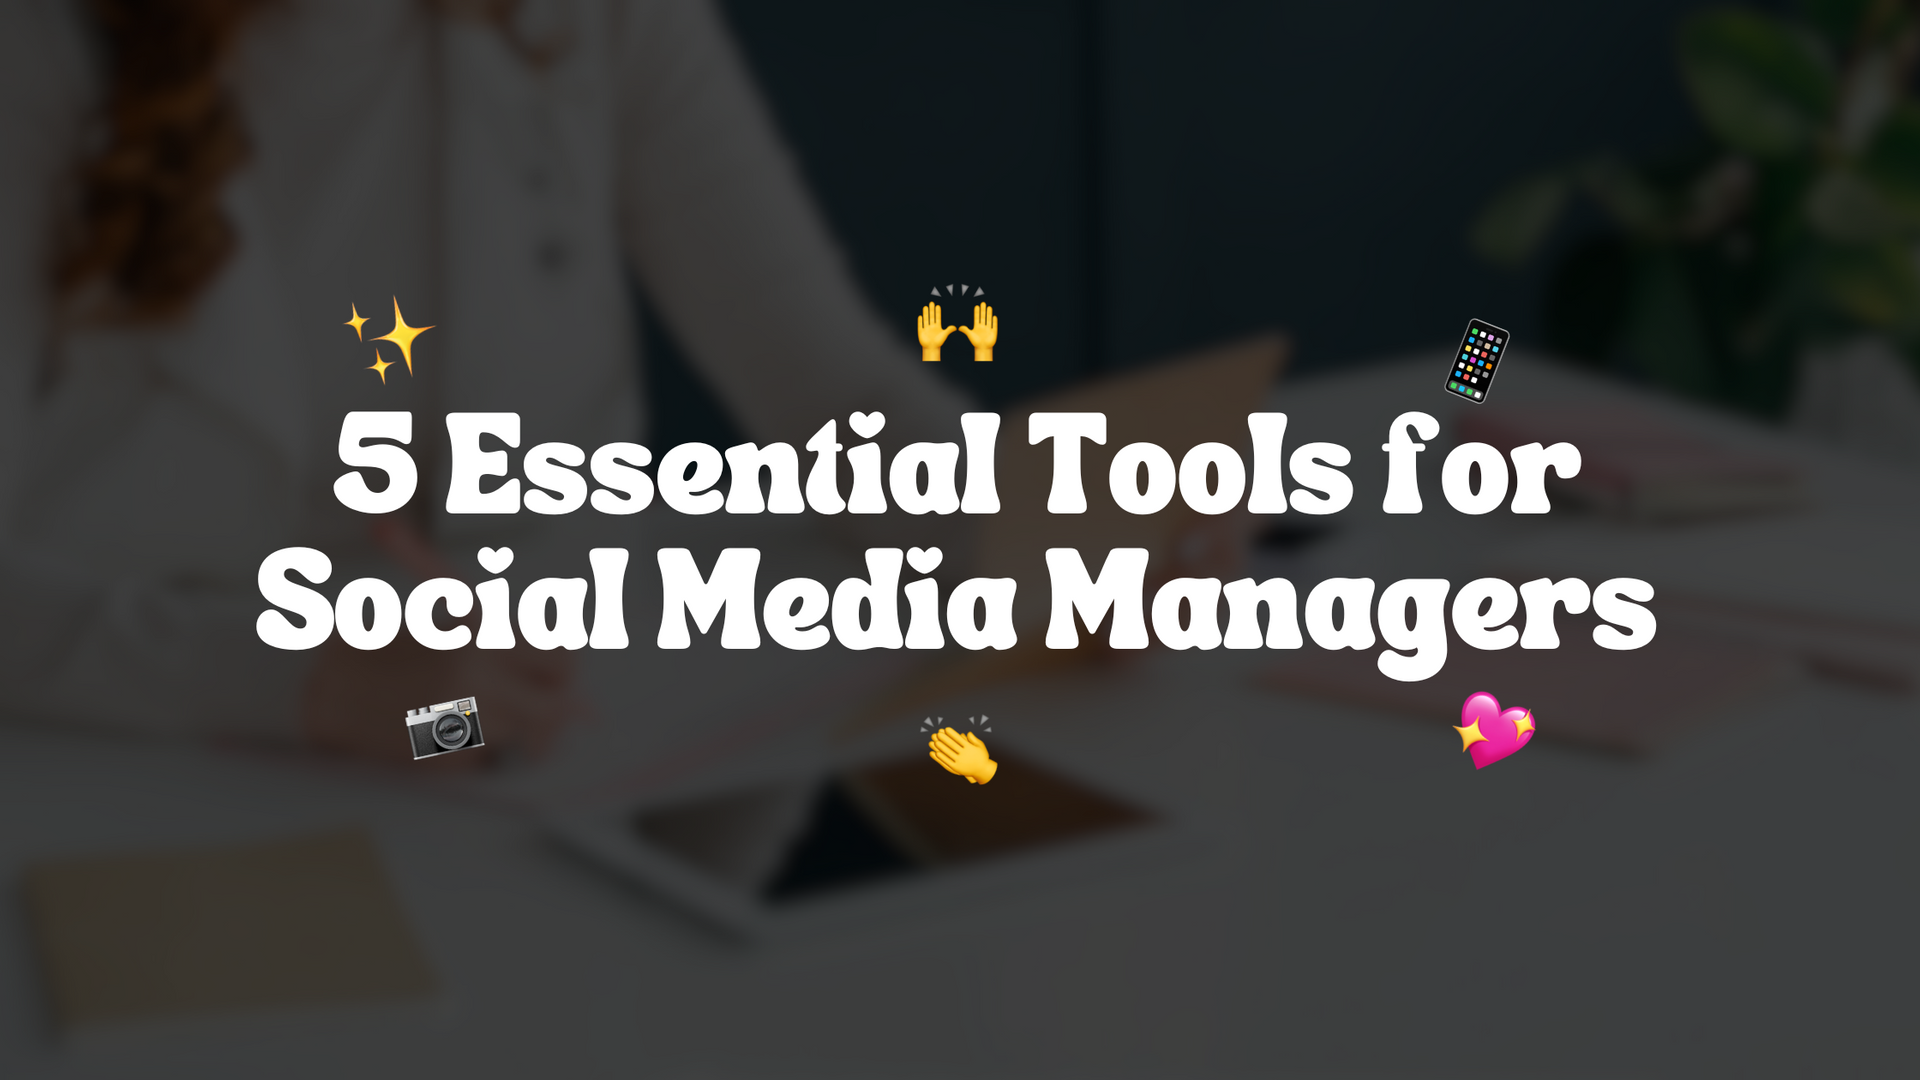 Here are five tools that our team uses daily to enhance our social media management tasks.